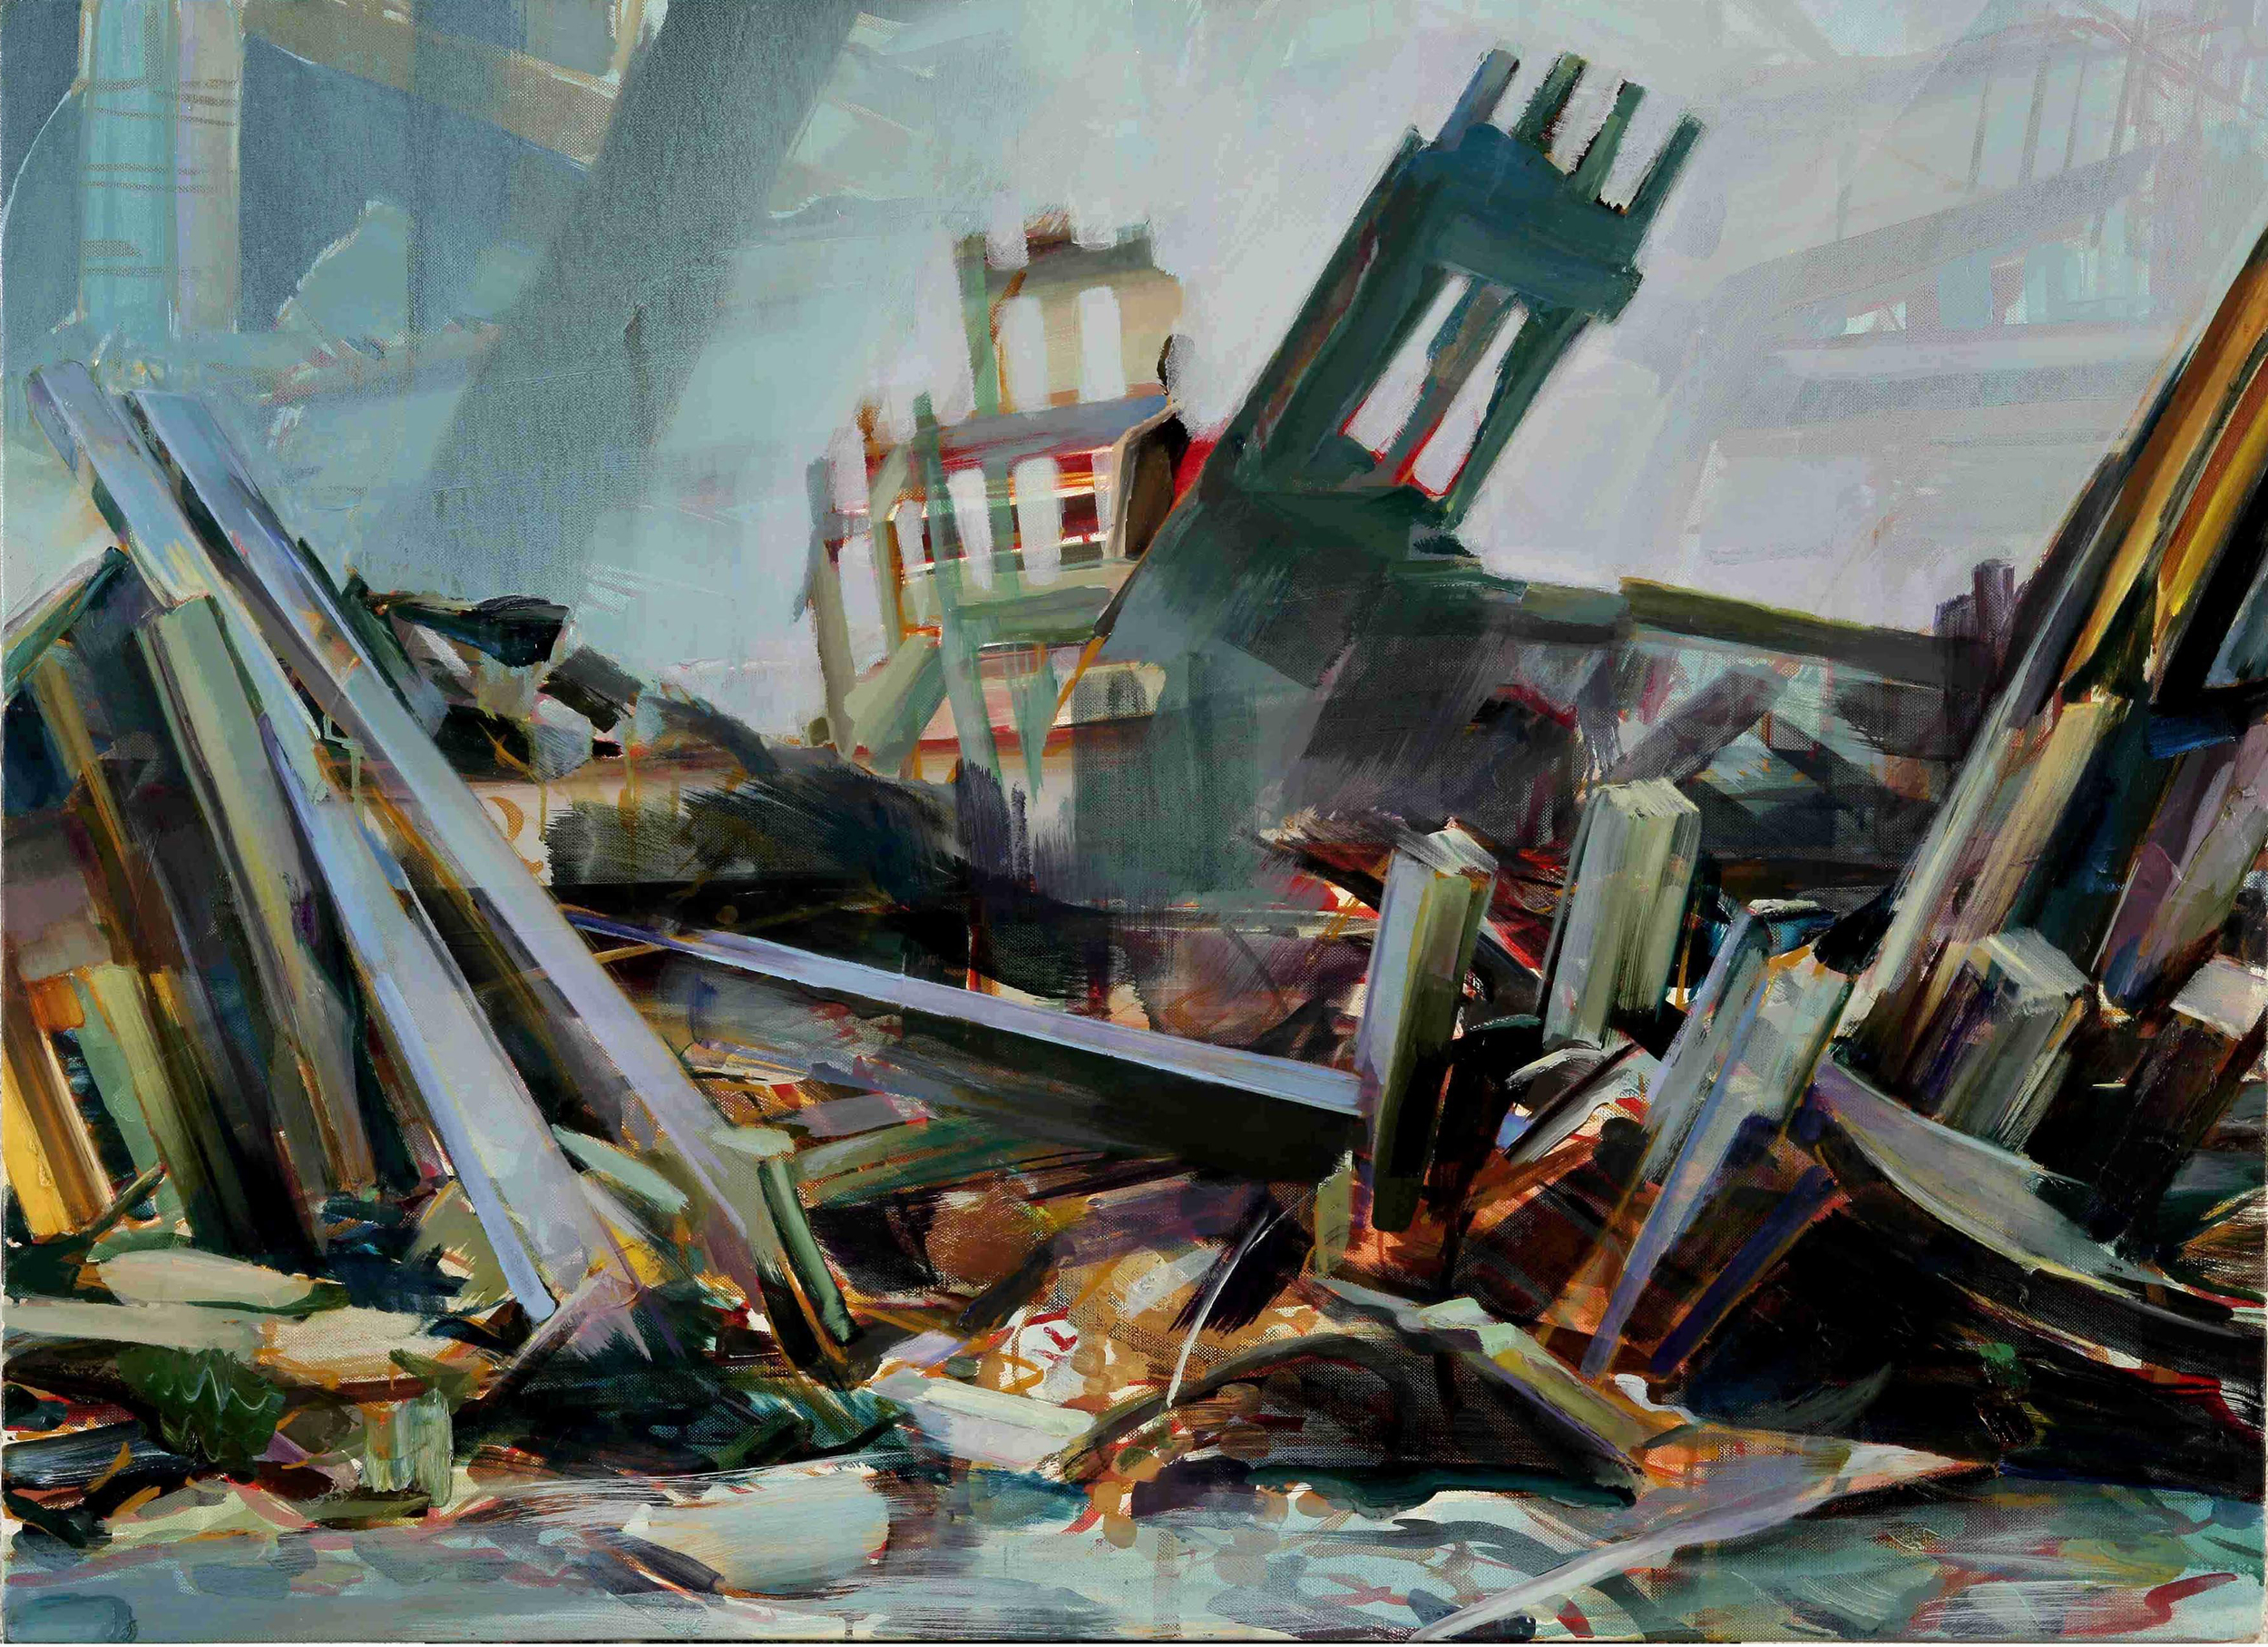   Twin Towers-Leipzig-St Ouen , 2010, oil on canvas, 73 x 100cm. Private collection, France 